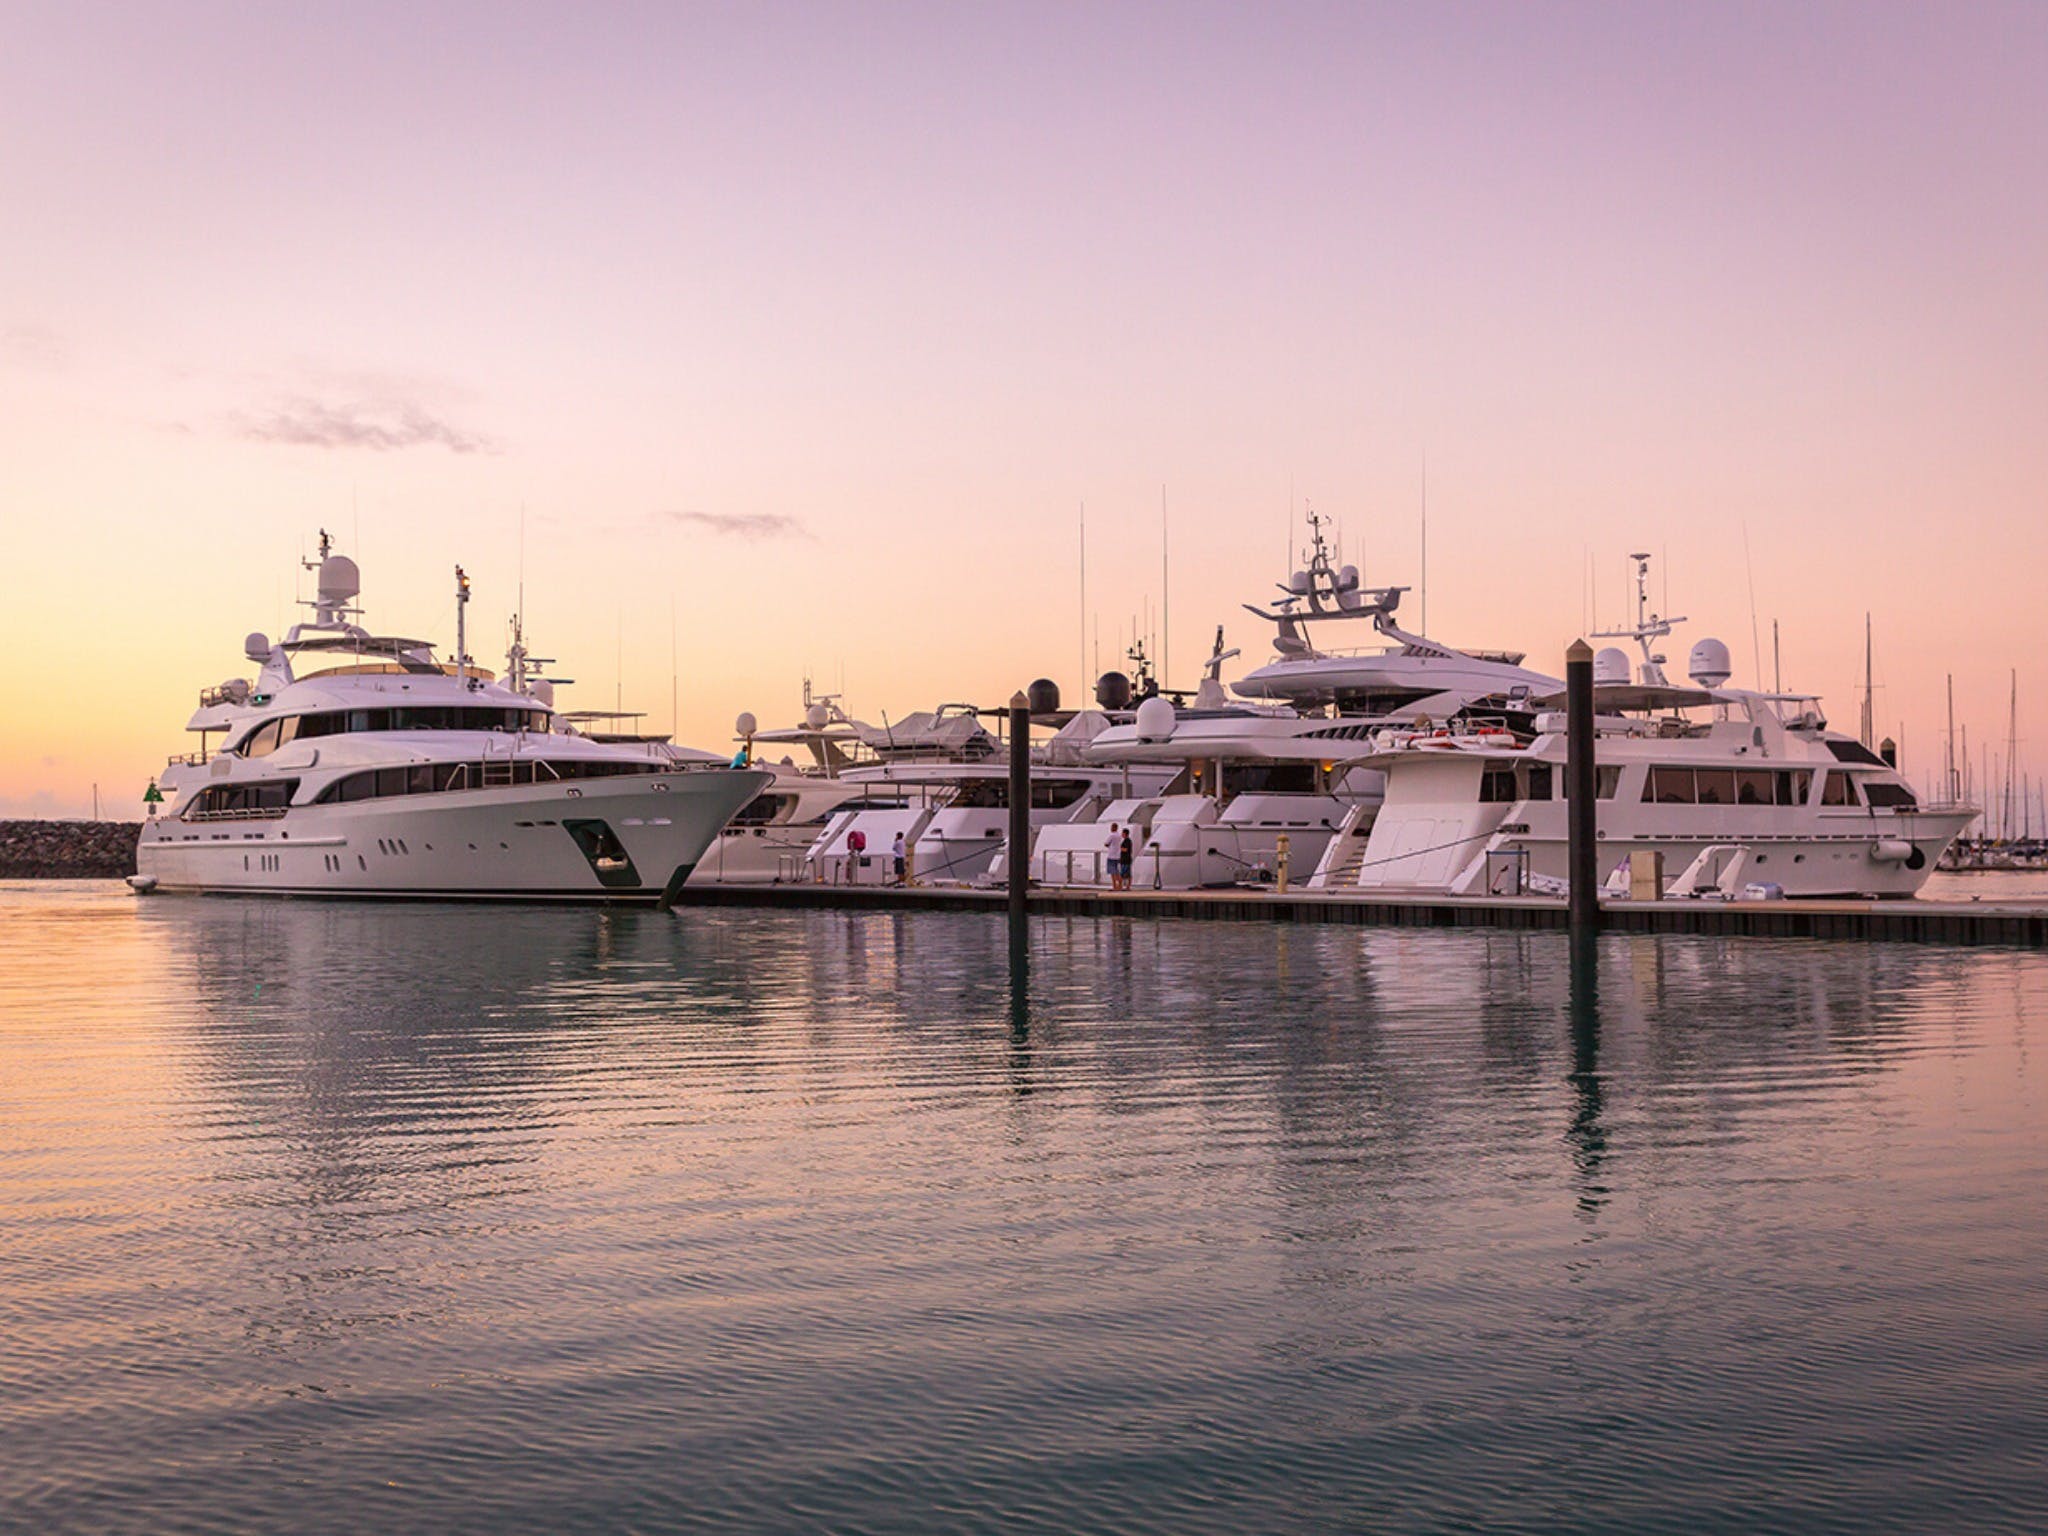 Australian Superyacht Rendezvous - Great Barrier Reef edition - Wagga Wagga Accommodation